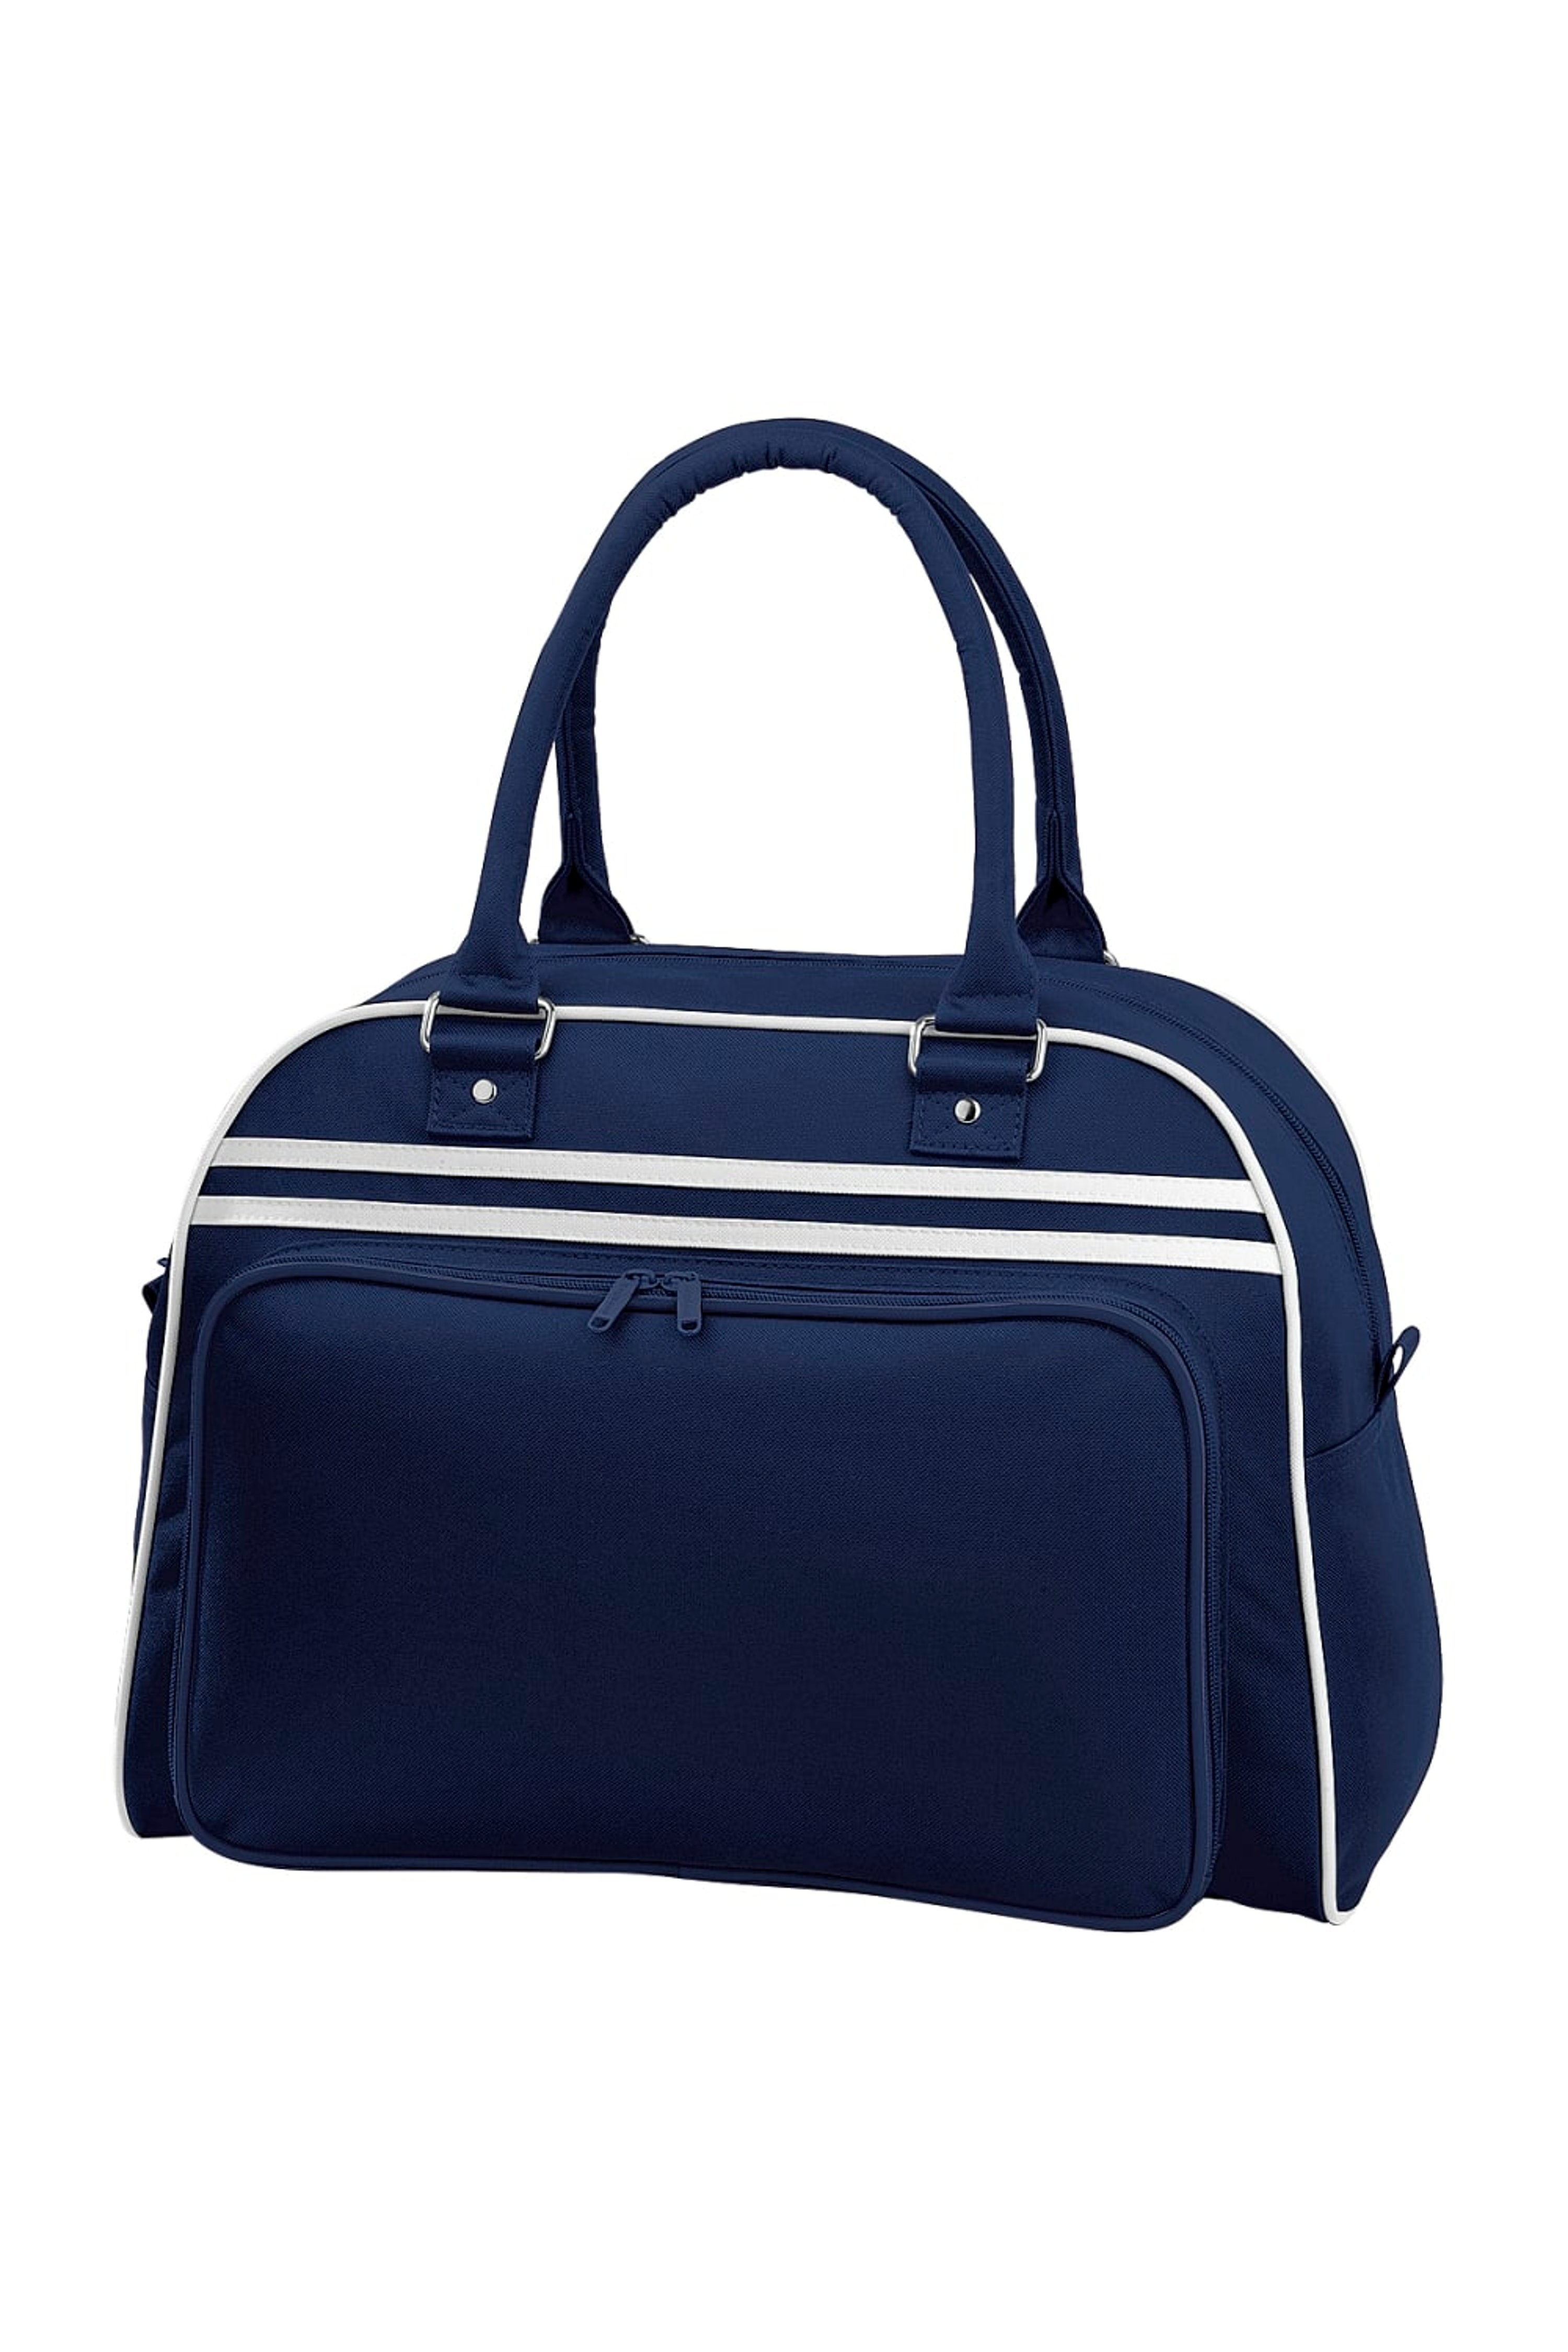 French Navy/White Retro Bowling Bag by BagBase 7 Colours Avilable